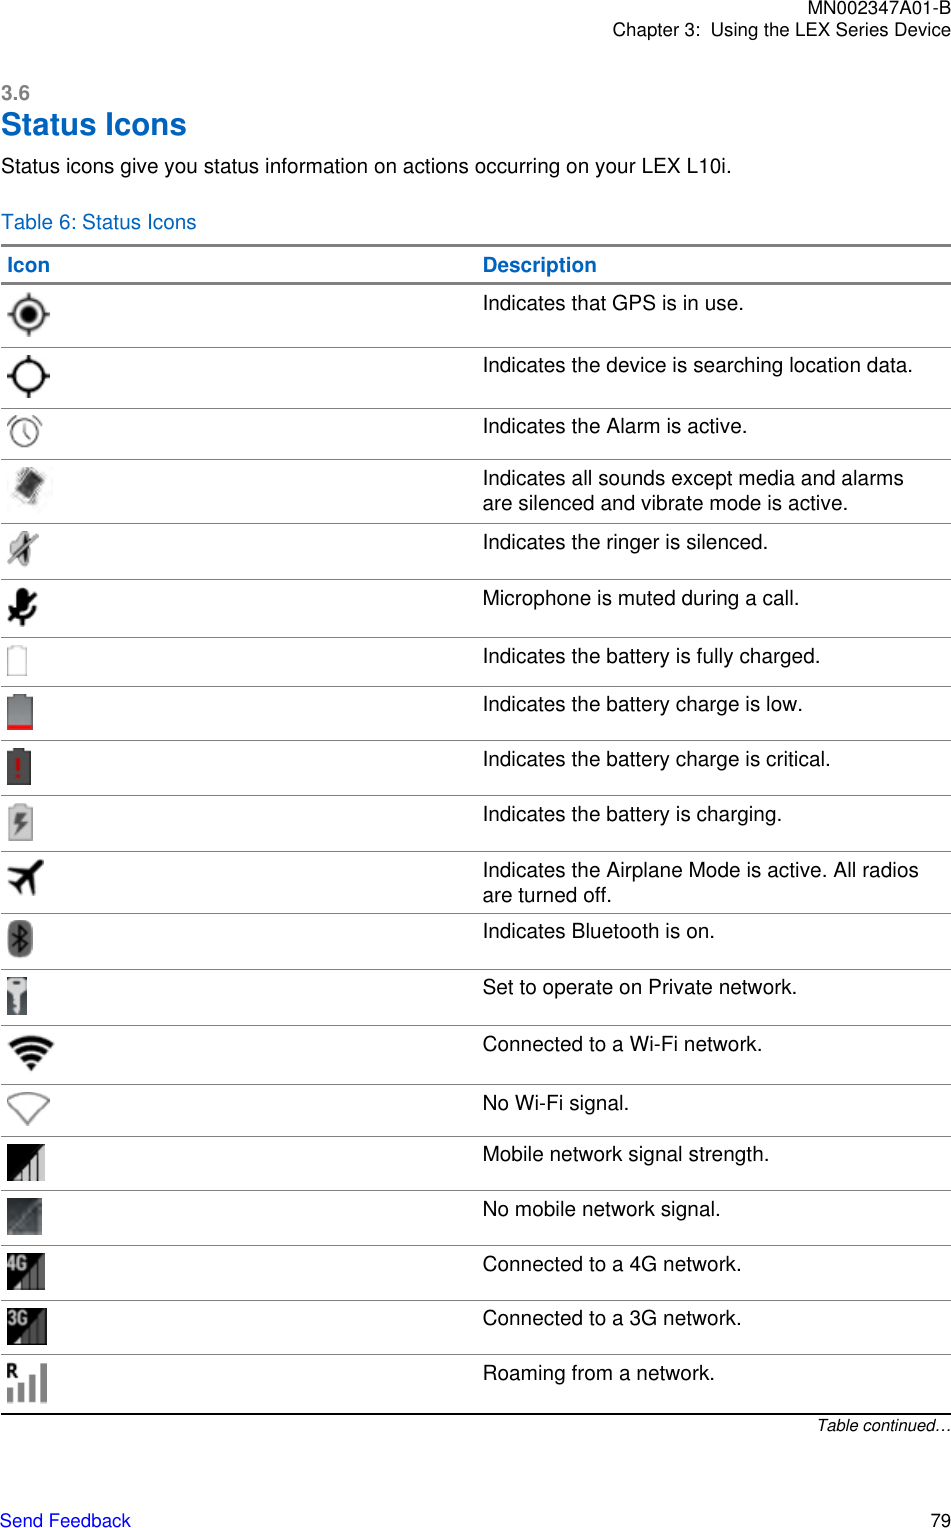 3.6Status Icons Status icons give you status information on actions occurring on your LEX L10i.Table 6: Status IconsIcon DescriptionIndicates that GPS is in use.Indicates the device is searching location data.Indicates the Alarm is active.Indicates all sounds except media and alarmsare silenced and vibrate mode is active.Indicates the ringer is silenced.Microphone is muted during a call.Indicates the battery is fully charged.Indicates the battery charge is low.Indicates the battery charge is critical.Indicates the battery is charging.Indicates the Airplane Mode is active. All radiosare turned off.Indicates Bluetooth is on.Set to operate on Private network.Connected to a Wi-Fi network.No Wi-Fi signal.Mobile network signal strength.No mobile network signal.Connected to a 4G network.Connected to a 3G network.Roaming from a network.Table continued…MN002347A01-BChapter 3:  Using the LEX Series DeviceSend Feedback   79